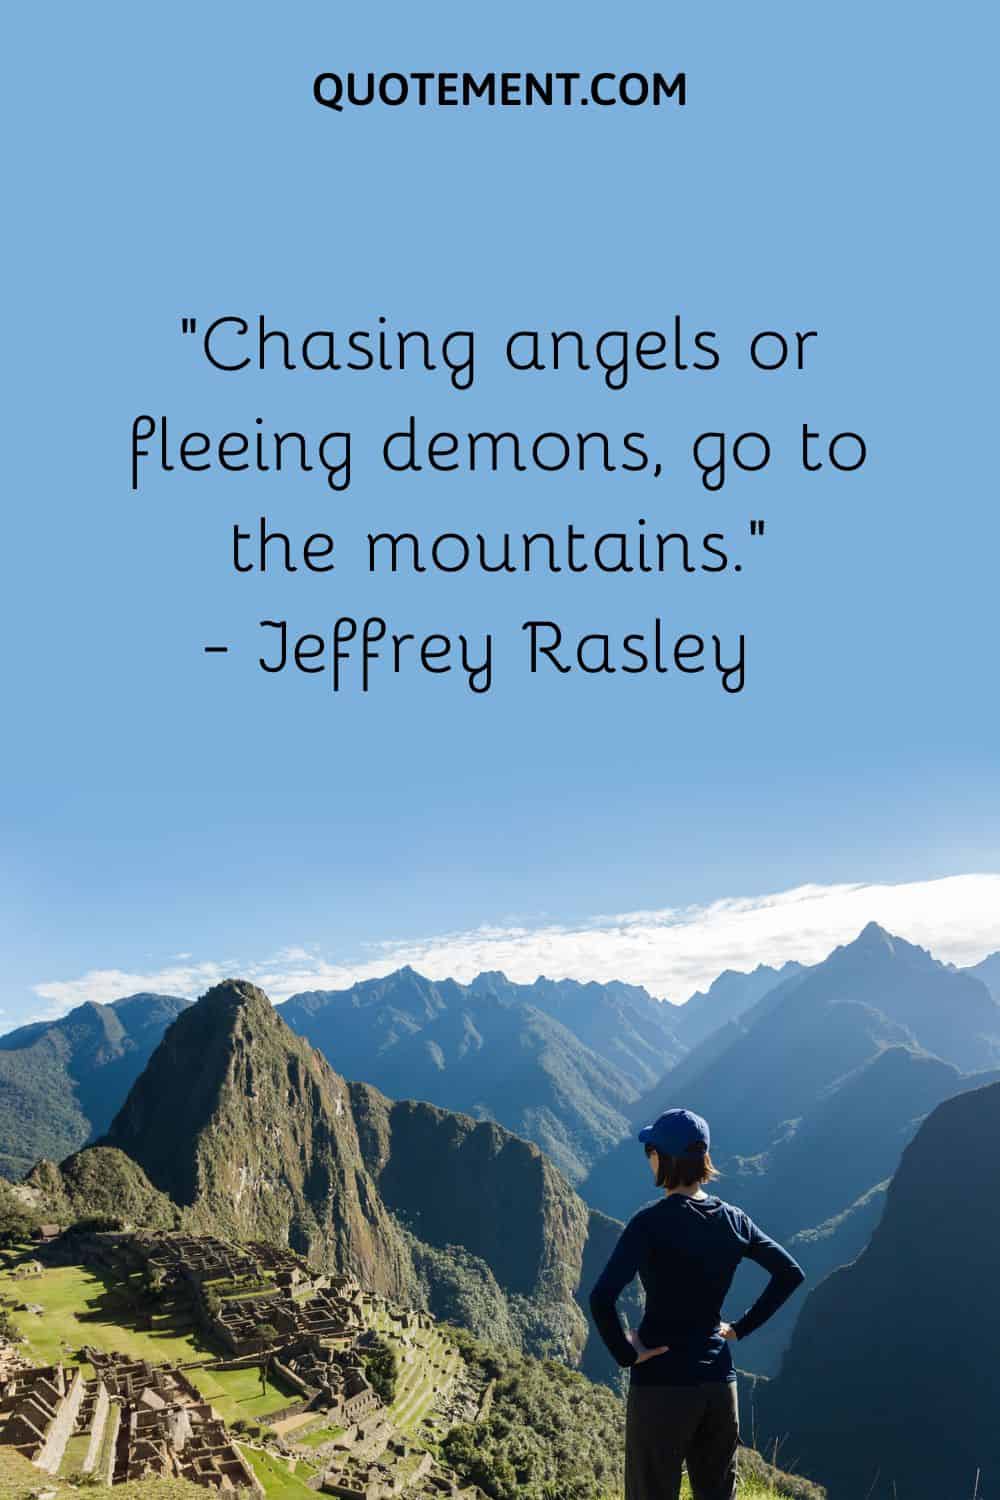 “Chasing angels or fleeing demons, go to the mountains.”— Jeffrey Rasley